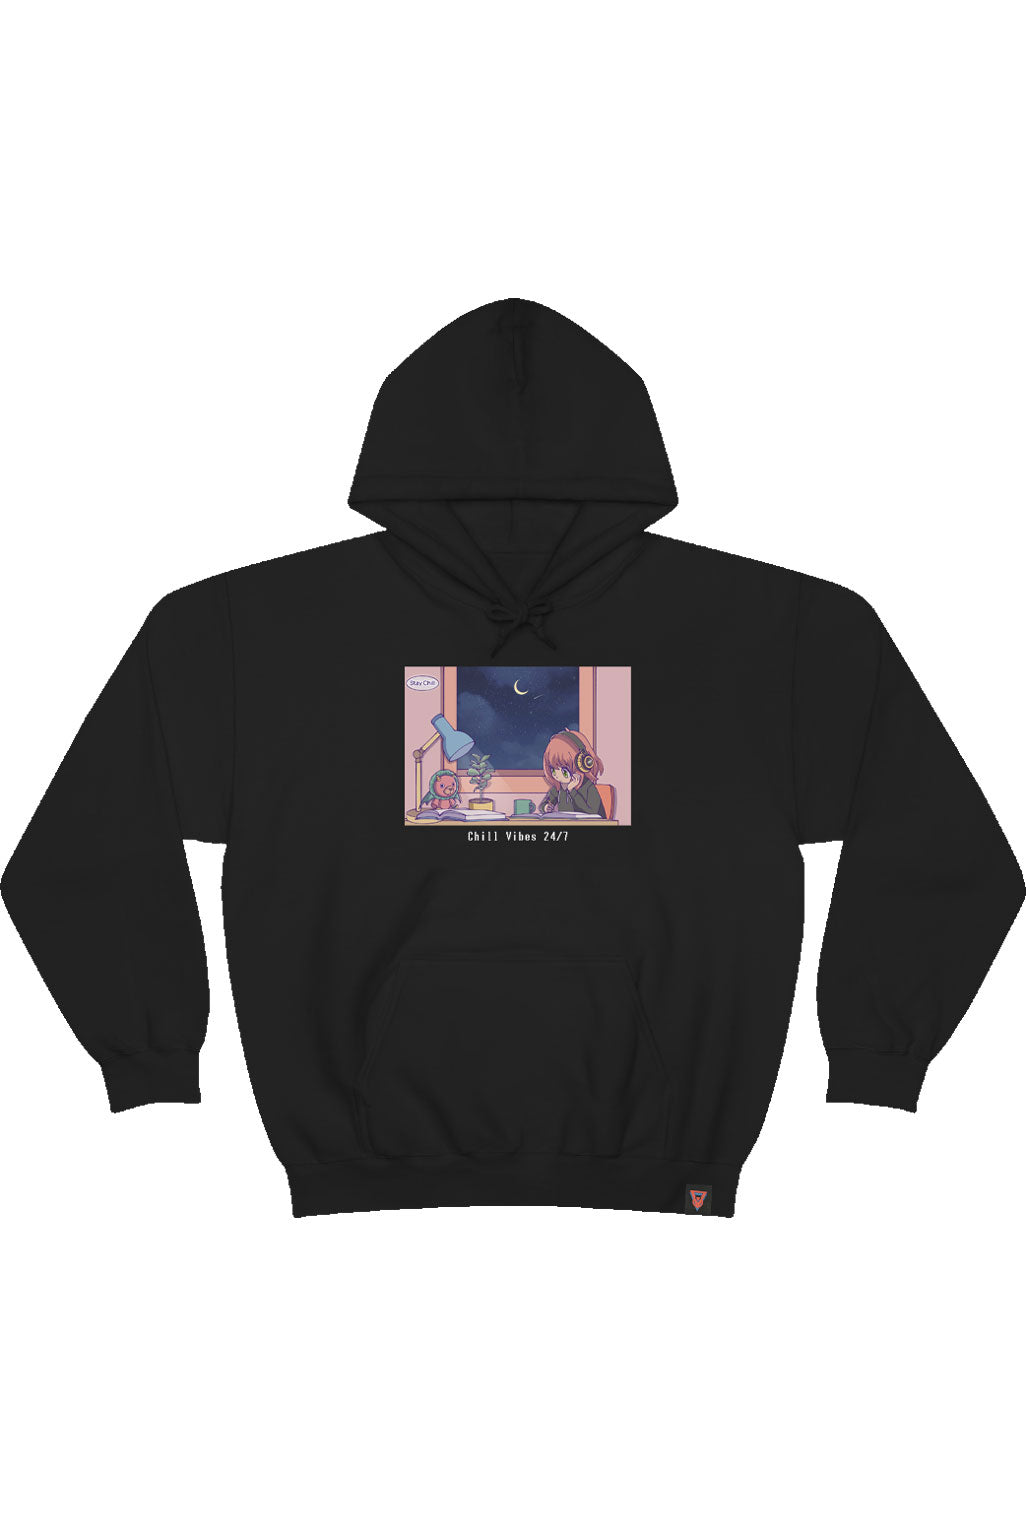 Chill Vibes 24/7 Hoodie